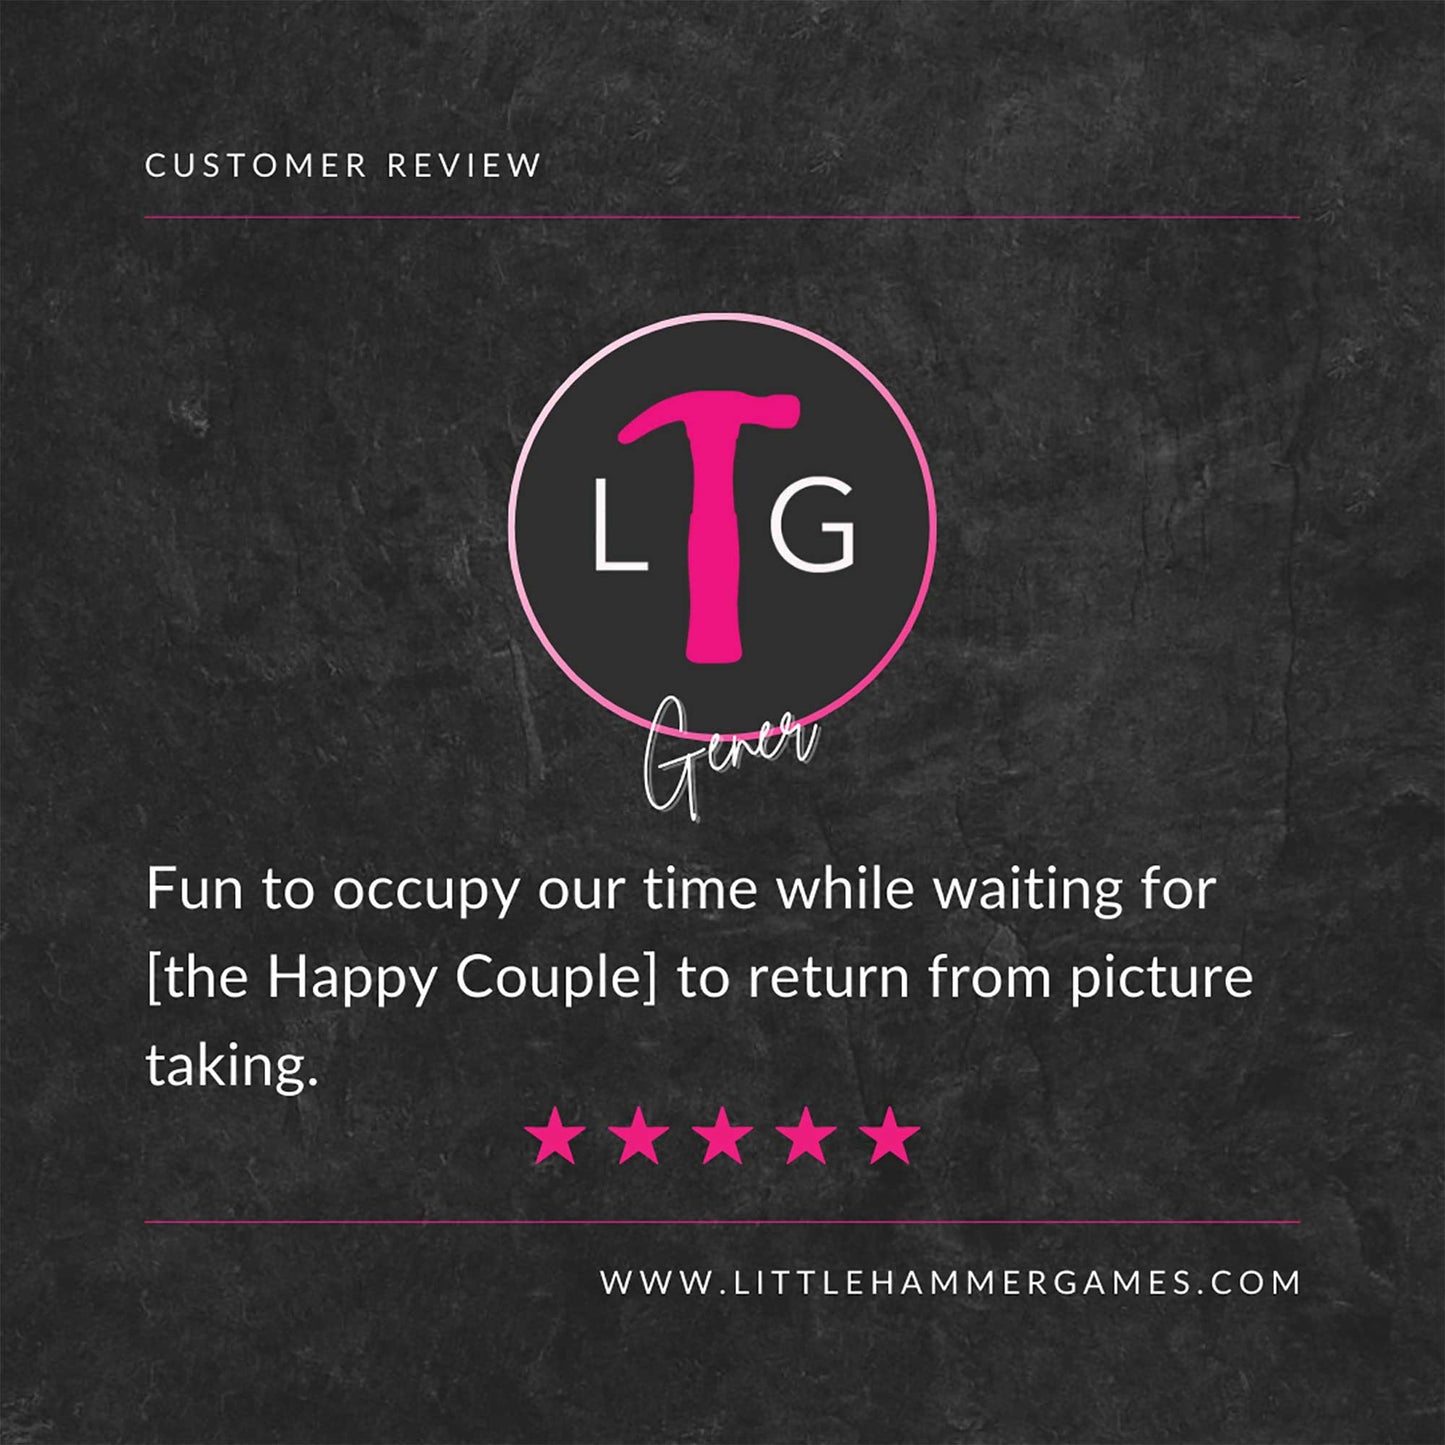 White and pink text on a slate background with a 5-star review that says "Fun to occupy our time while waiting for [the Happy Couple] to return from picture taking